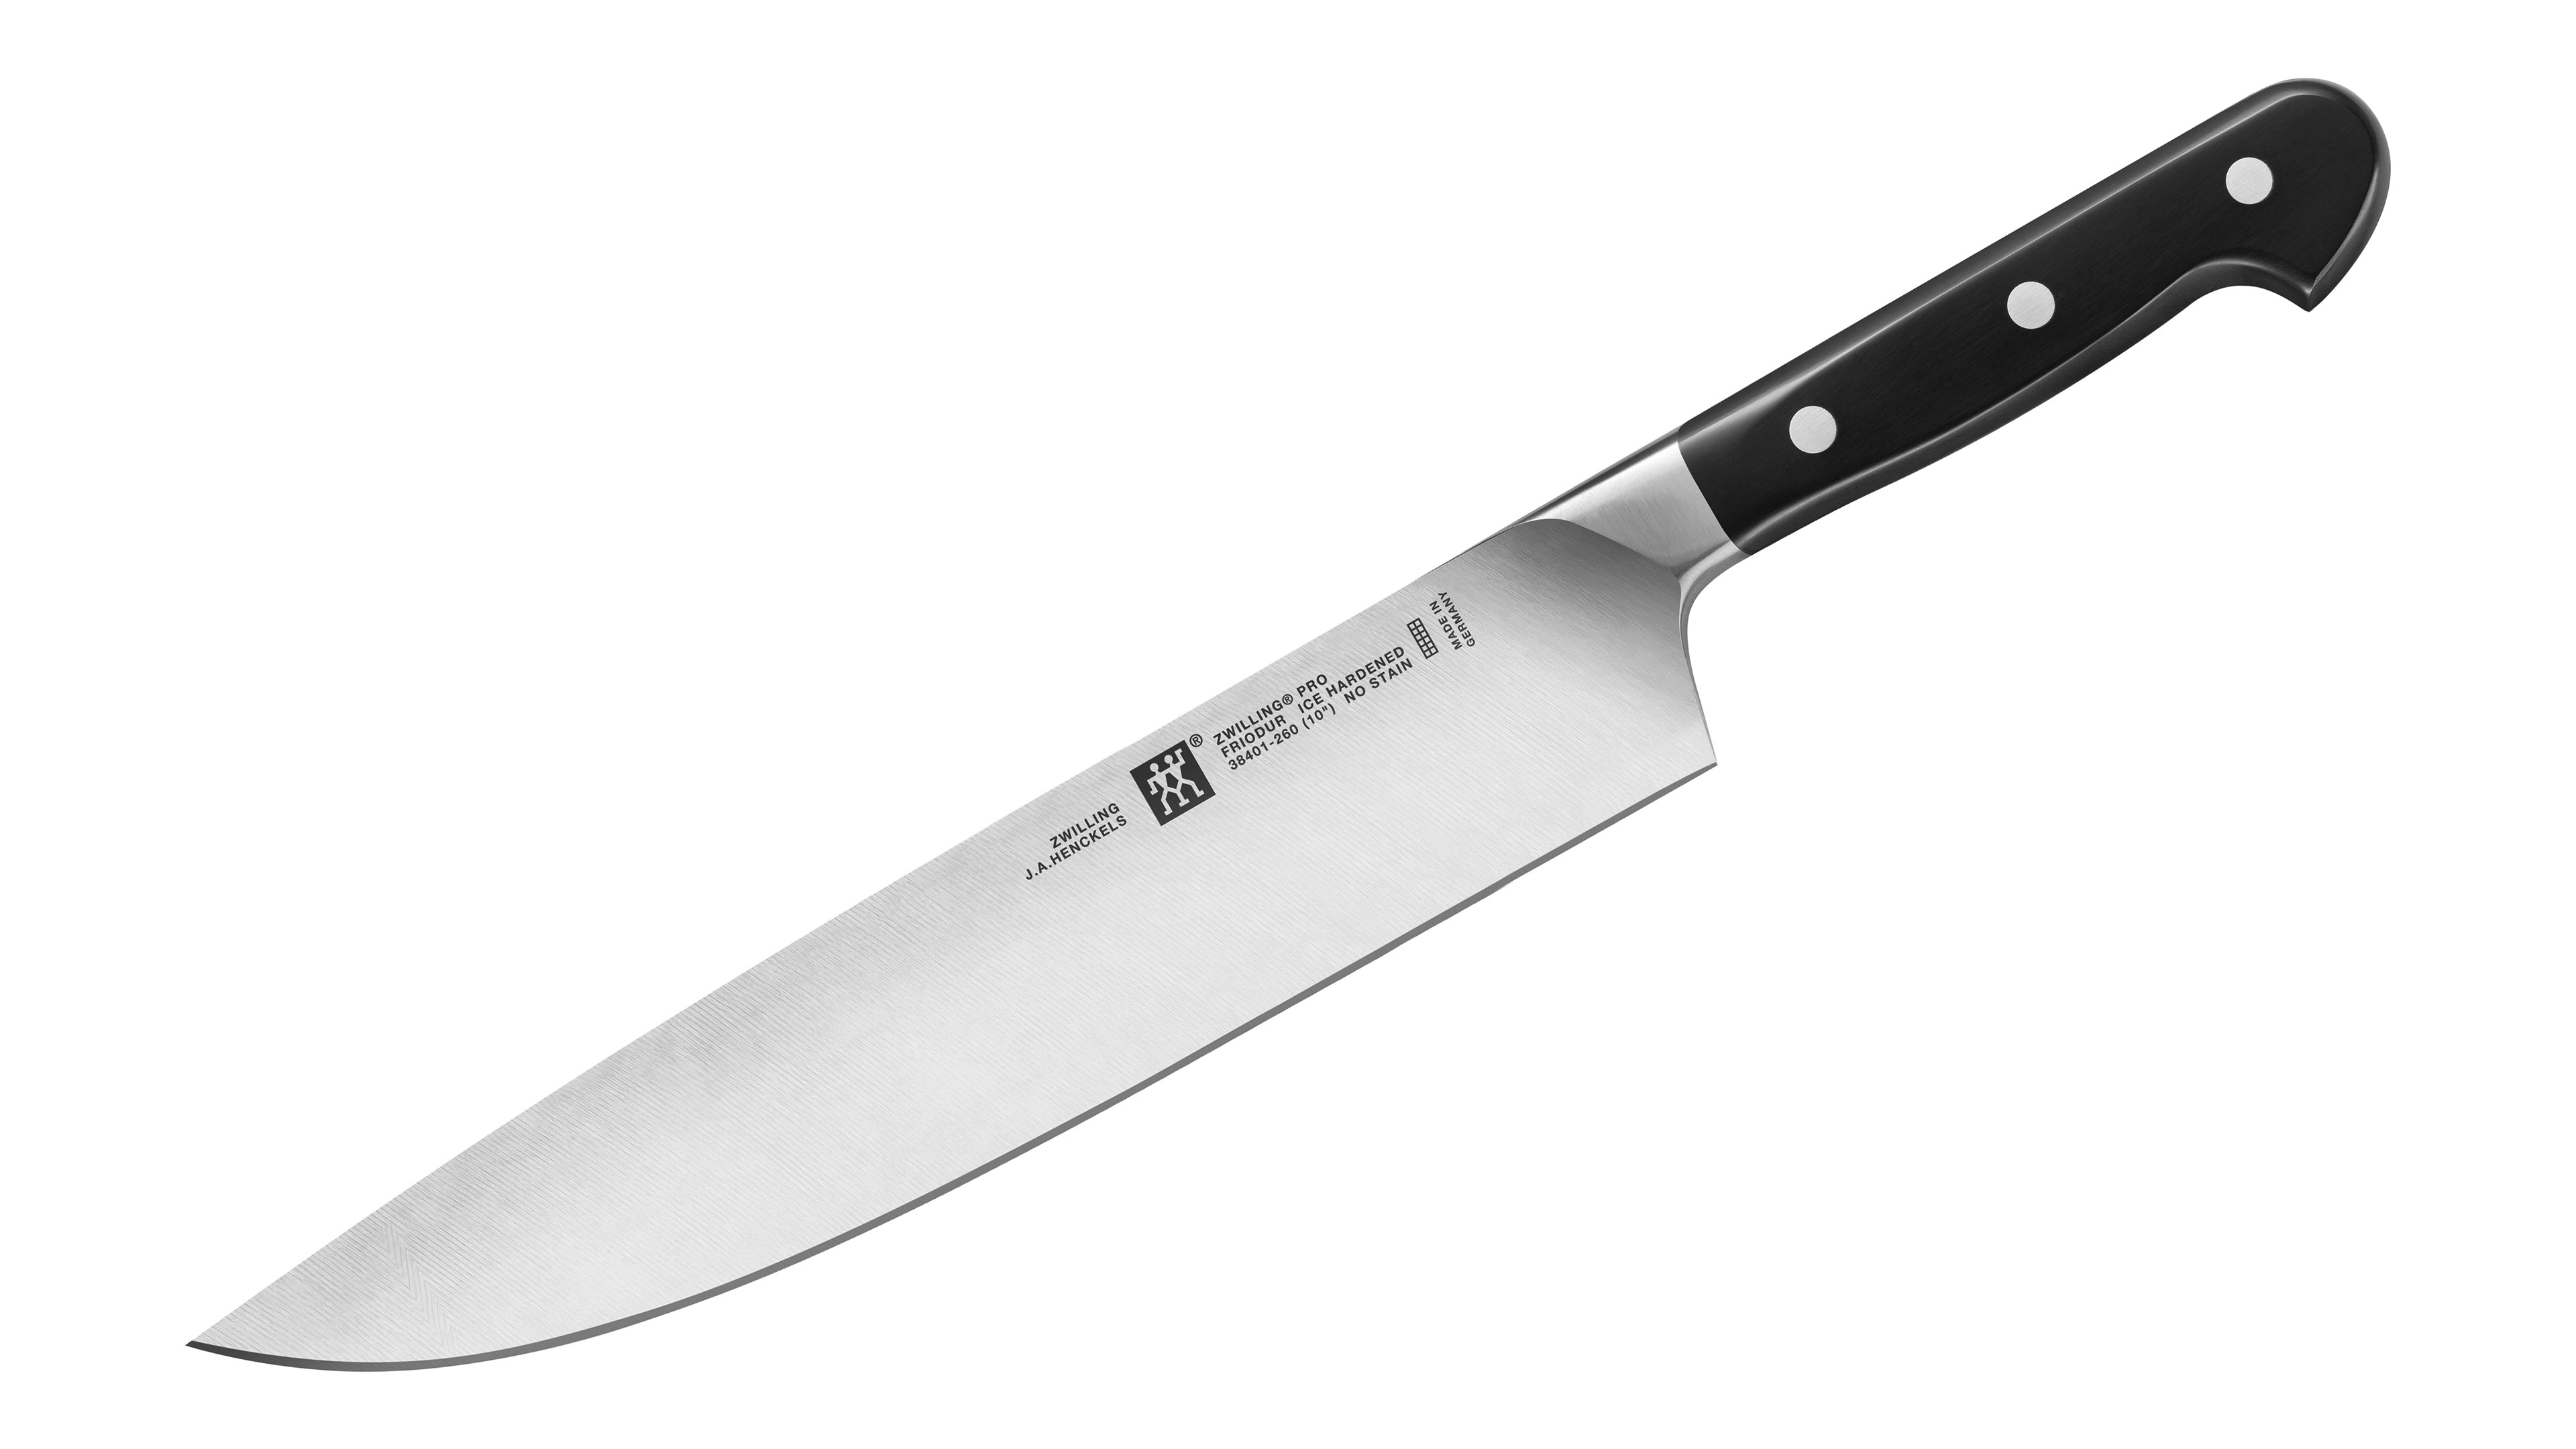 Zwilling J.A. Henckels Pro Chef's Knife, 10-inch | Cutlery and More